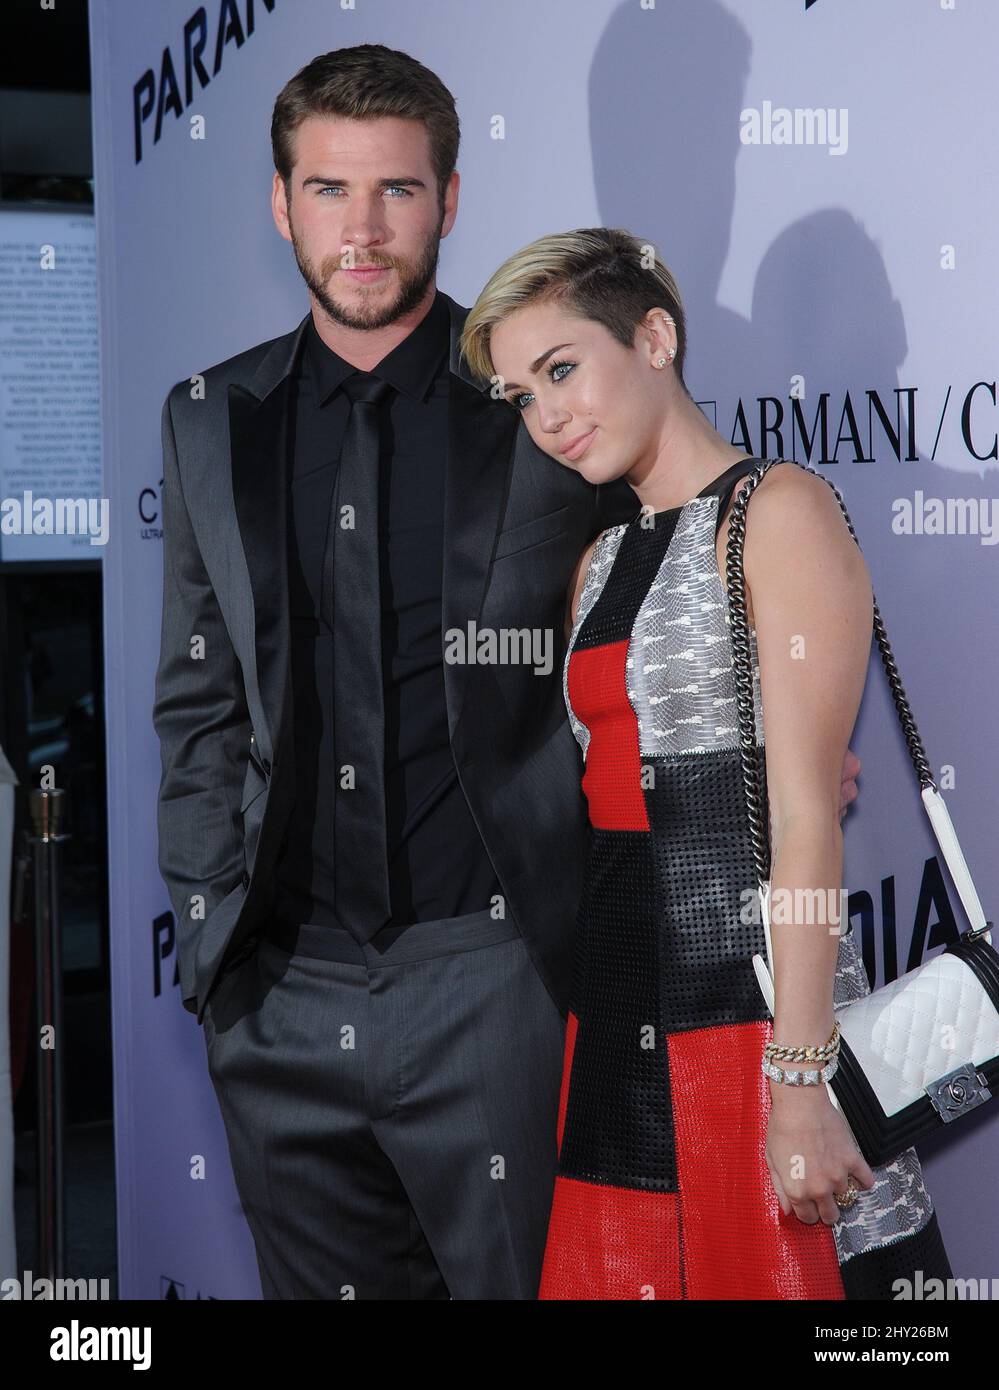 Liam Hemsworth & Miley Cyrus attends the 'Paranoia' US premiere held at the Directors Guild of America, Los Angeles. Stock Photo